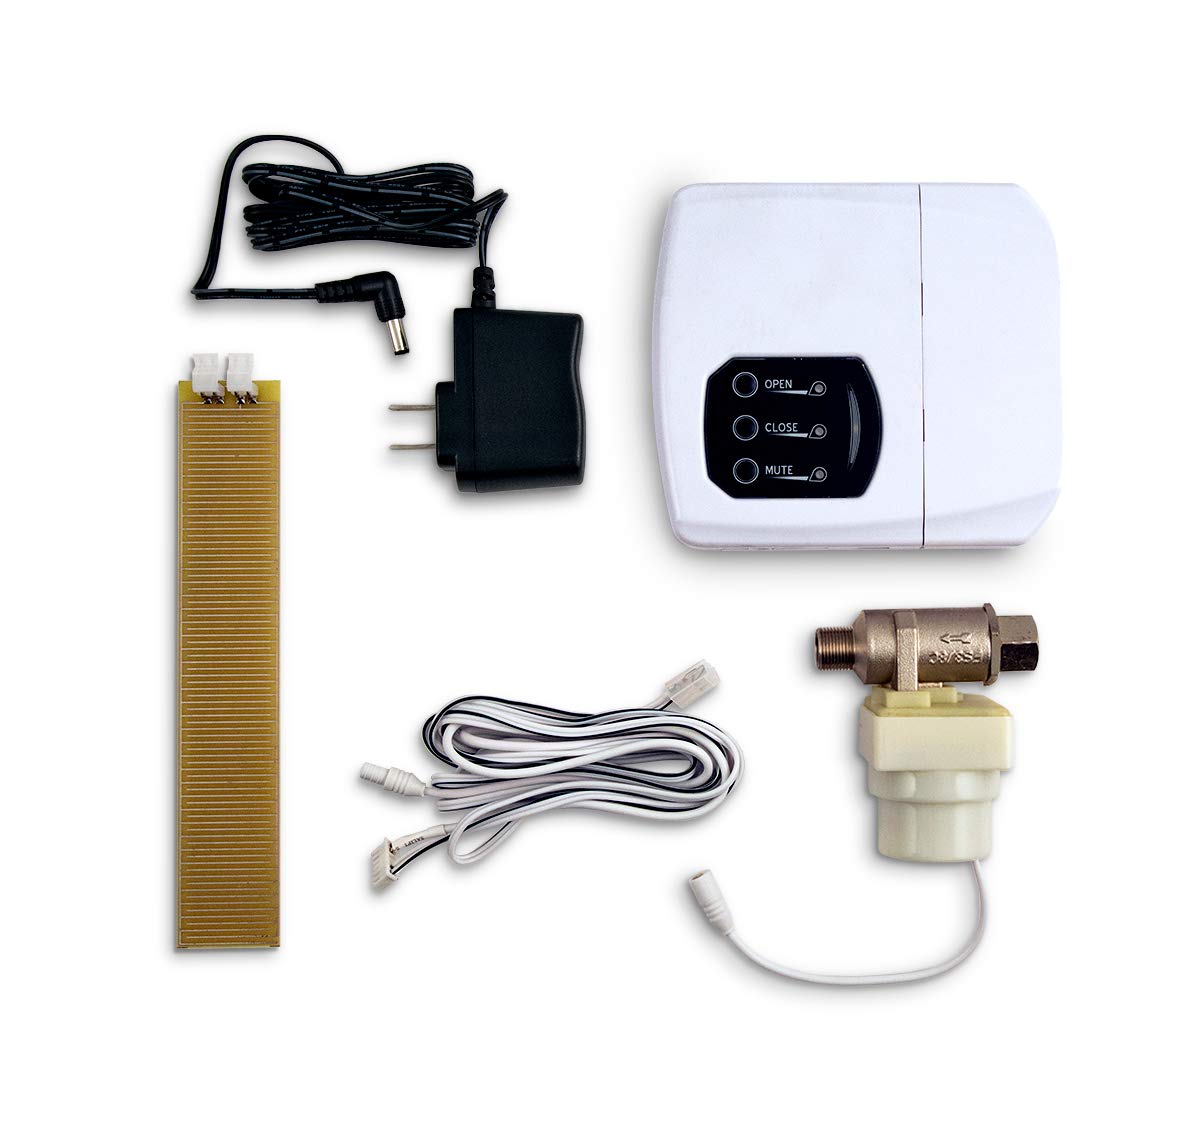 LeakSmart Automatic Leak Detection and Water Appliance Shut Off Kits- Protect Your Home from High Leak Risk Appliances (1, Dishwasher)